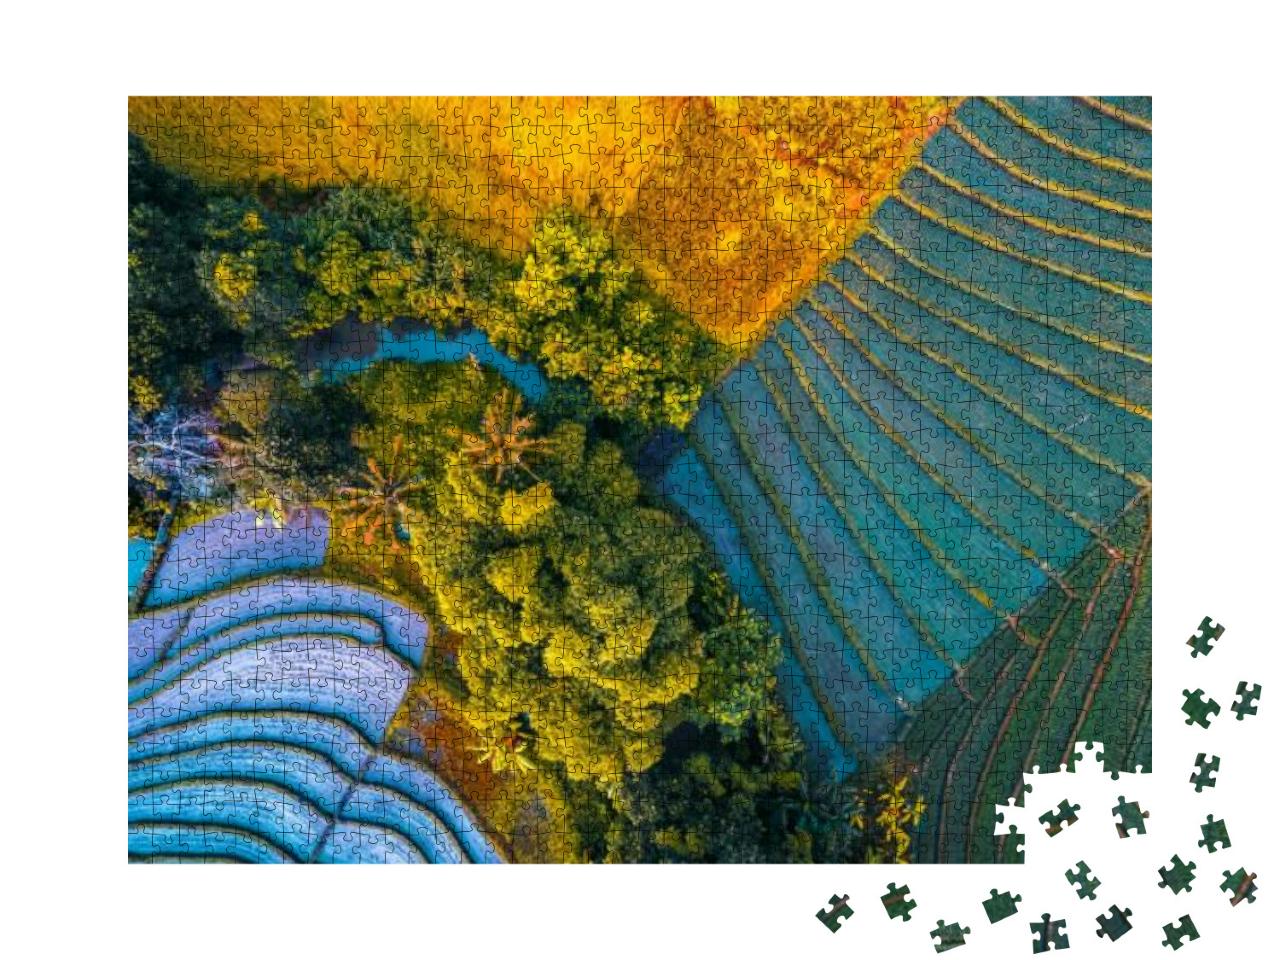 Rice Fields of Bali Island, Indonesia... Jigsaw Puzzle with 1000 pieces